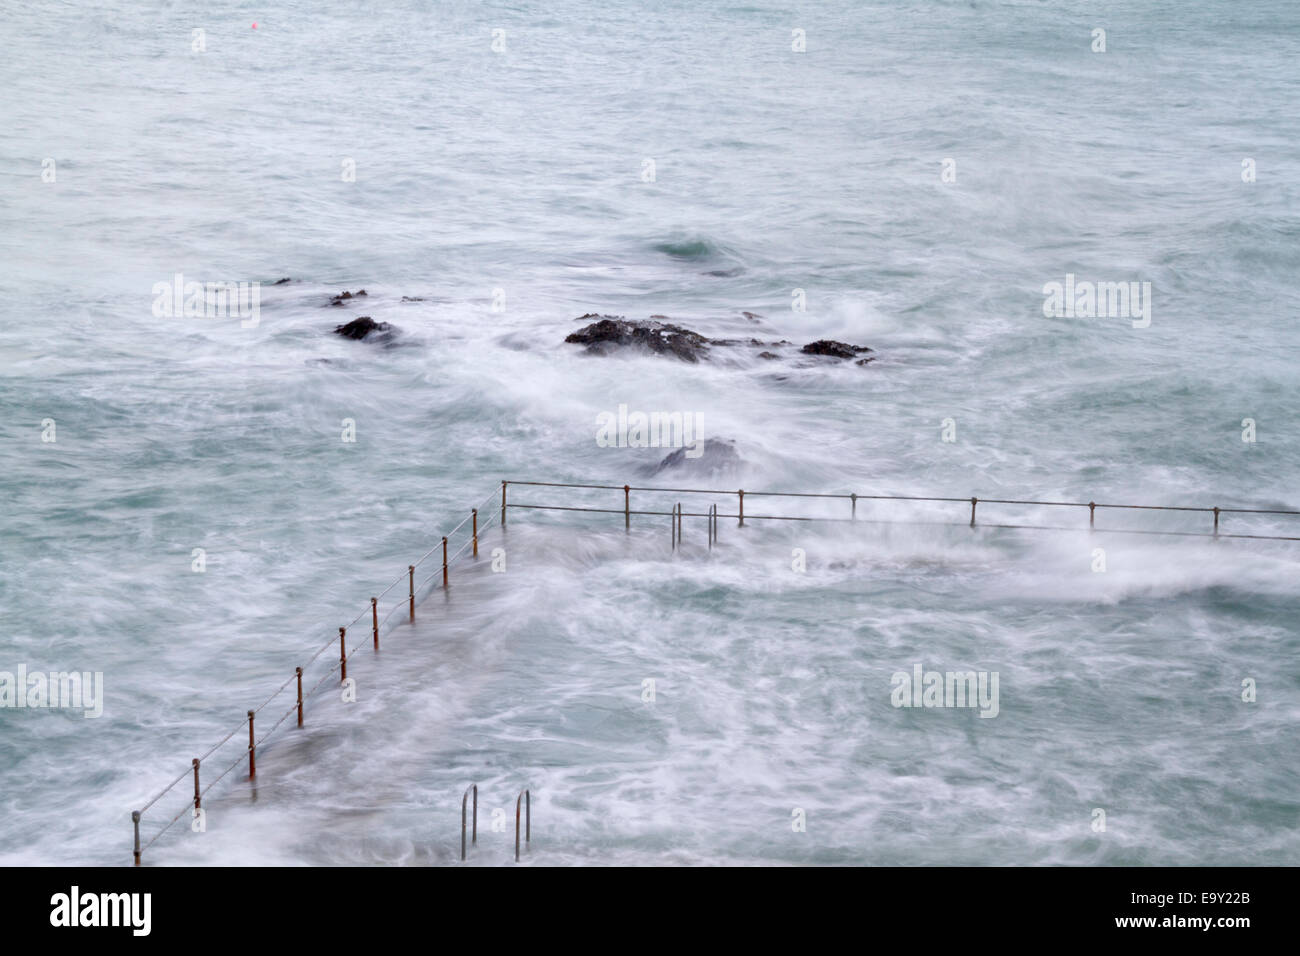 Piscina naturale in Guernsey, Isole del Canale Foto Stock